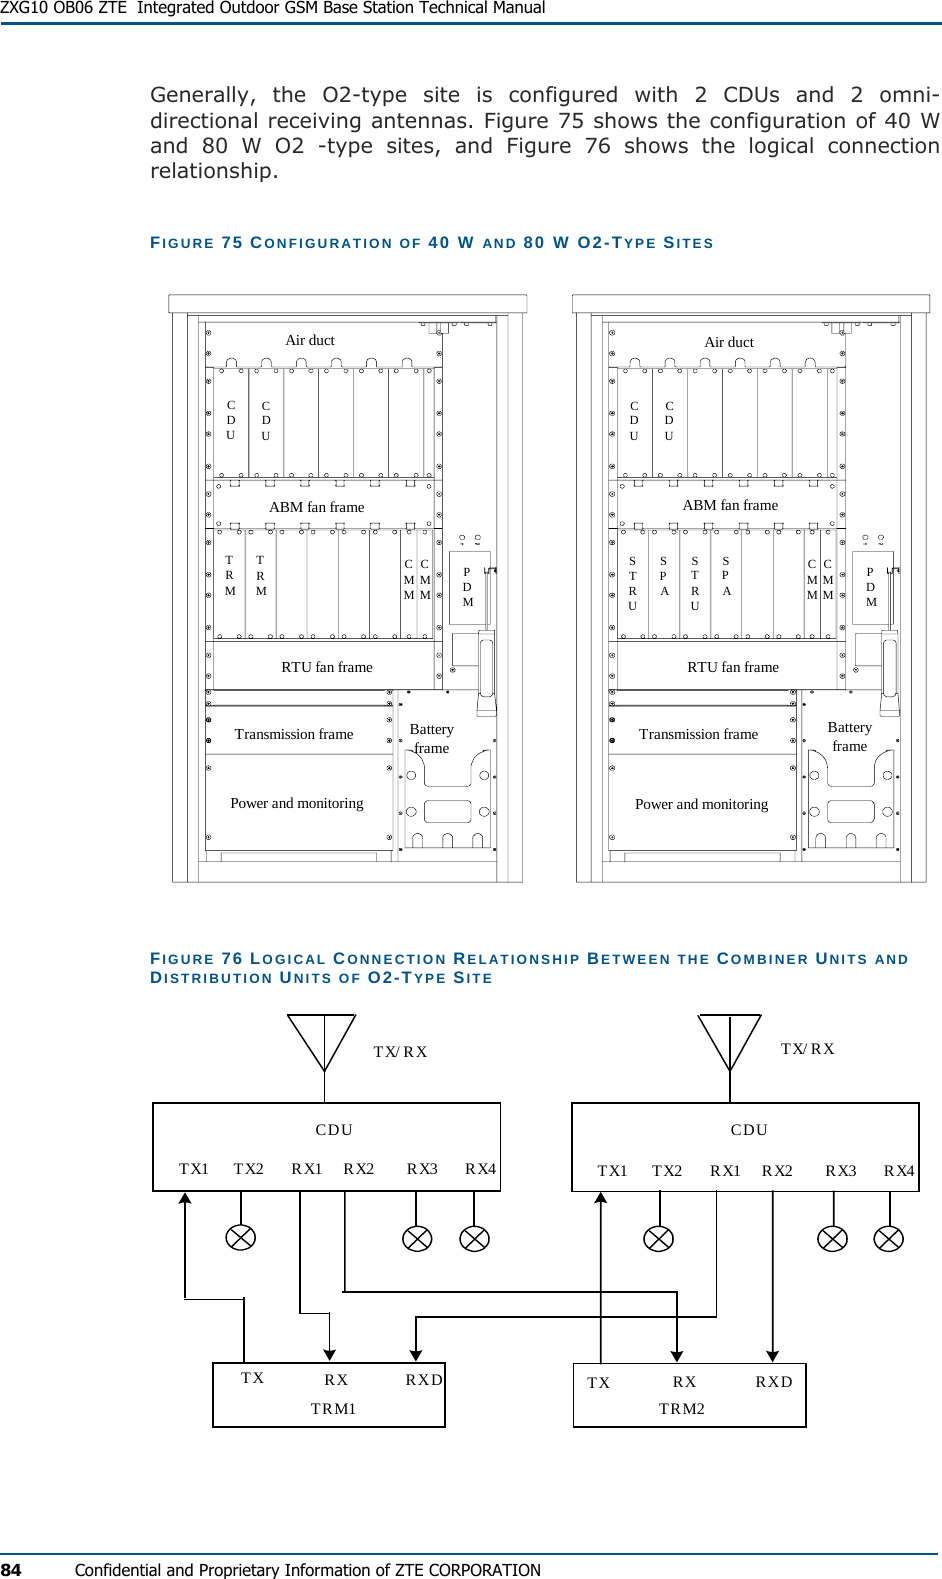  ZXG10 OB06 ZTE  Integrated Outdoor GSM Base Station Technical Manual 84  Confidential and Proprietary Information of ZTE CORPORATION Generally, the O2-type site is configured with 2 CDUs and 2 omni-directional receiving antennas. Figure 75 shows the configuration of 40 W and 80 W O2 -type sites, and Figure 76 shows the logical connection relationship. FIGURE 75 CONFIGURATION OF 40 W AND 80 W O2-TYPE SITES SPASTRUTRMCDUTRMCMMCMMPDMCDUCDUPDMCMMCMMSPASTRUCDUAir duct Air ductABM fan frame ABM fan frameRTU fan frame RTU fan frameBatteryframePower and monitoringTransmission frame BatteryframePower and monitoringTransmission frame FIGURE 76 LOGICAL CONNECTION RELATIONSHIP BETWEEN THE COMBINER UNITS AND DISTRIBUTION UNITS OF O2-TYPE SITE TX/RXTRM1TX RX RXDTRM2TX RX RXDCDUTX1 TX2 RX1 RX2 RX3 RX4CDUTX1 TX2 RX1 RX2 RX3 RX4TX/RX 